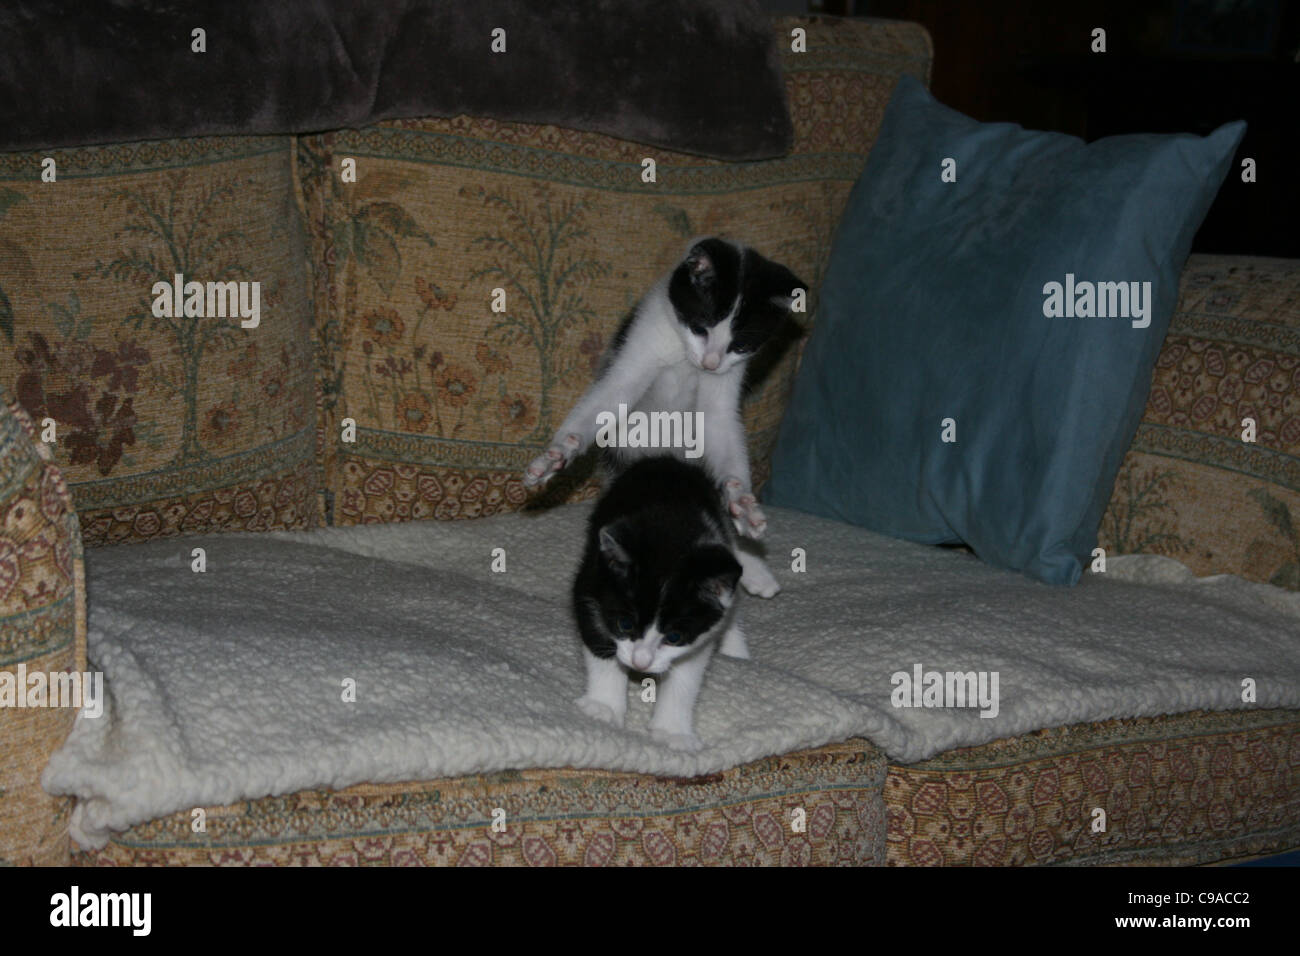 Black and white kittens on sofa with white fleece one kitten ready to jump on the other. Stock Photo